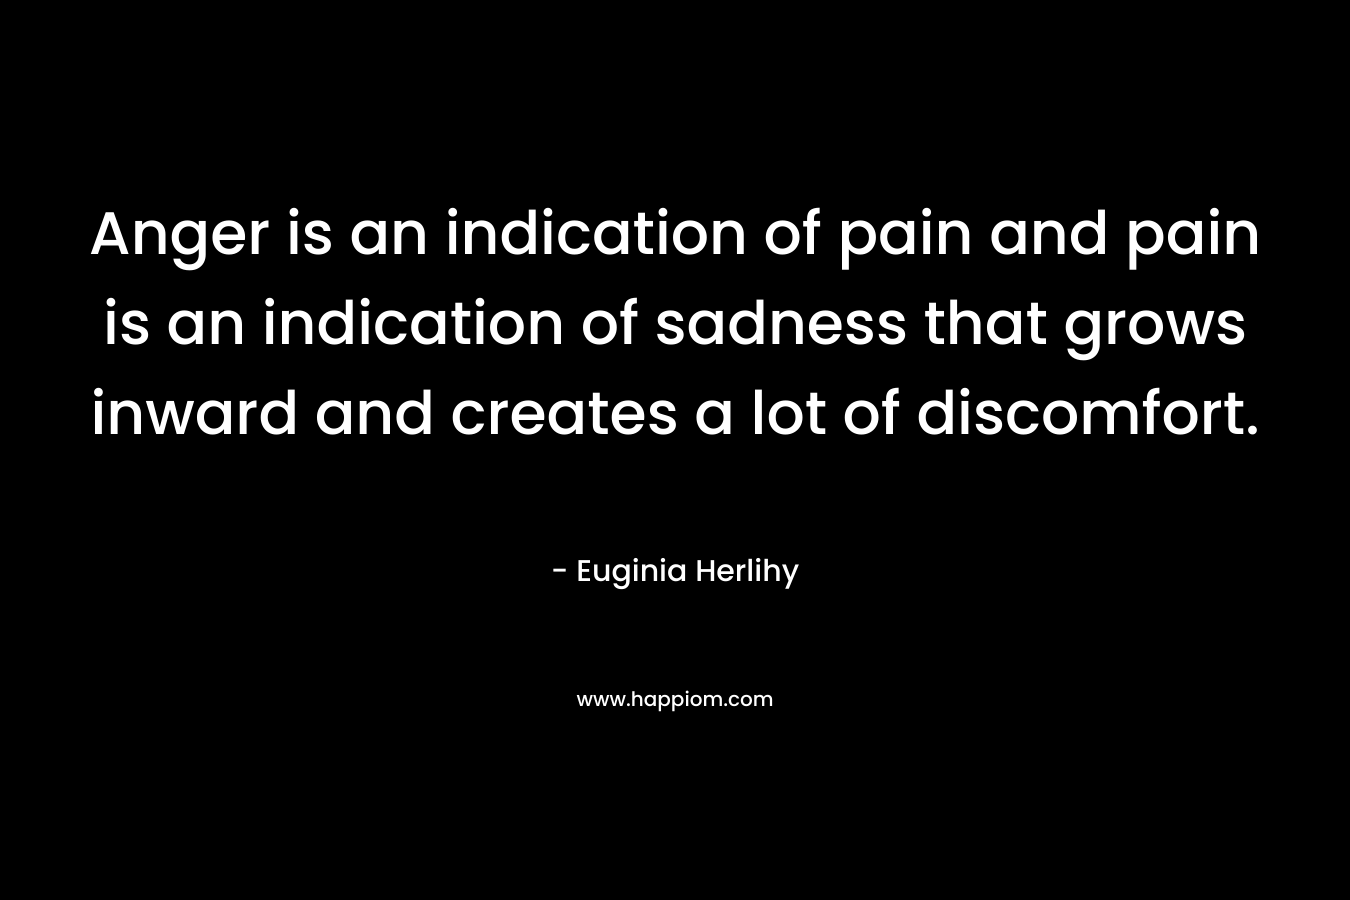 Anger is an indication of pain and pain is an indication of sadness that grows inward and creates a lot of discomfort. – Euginia Herlihy